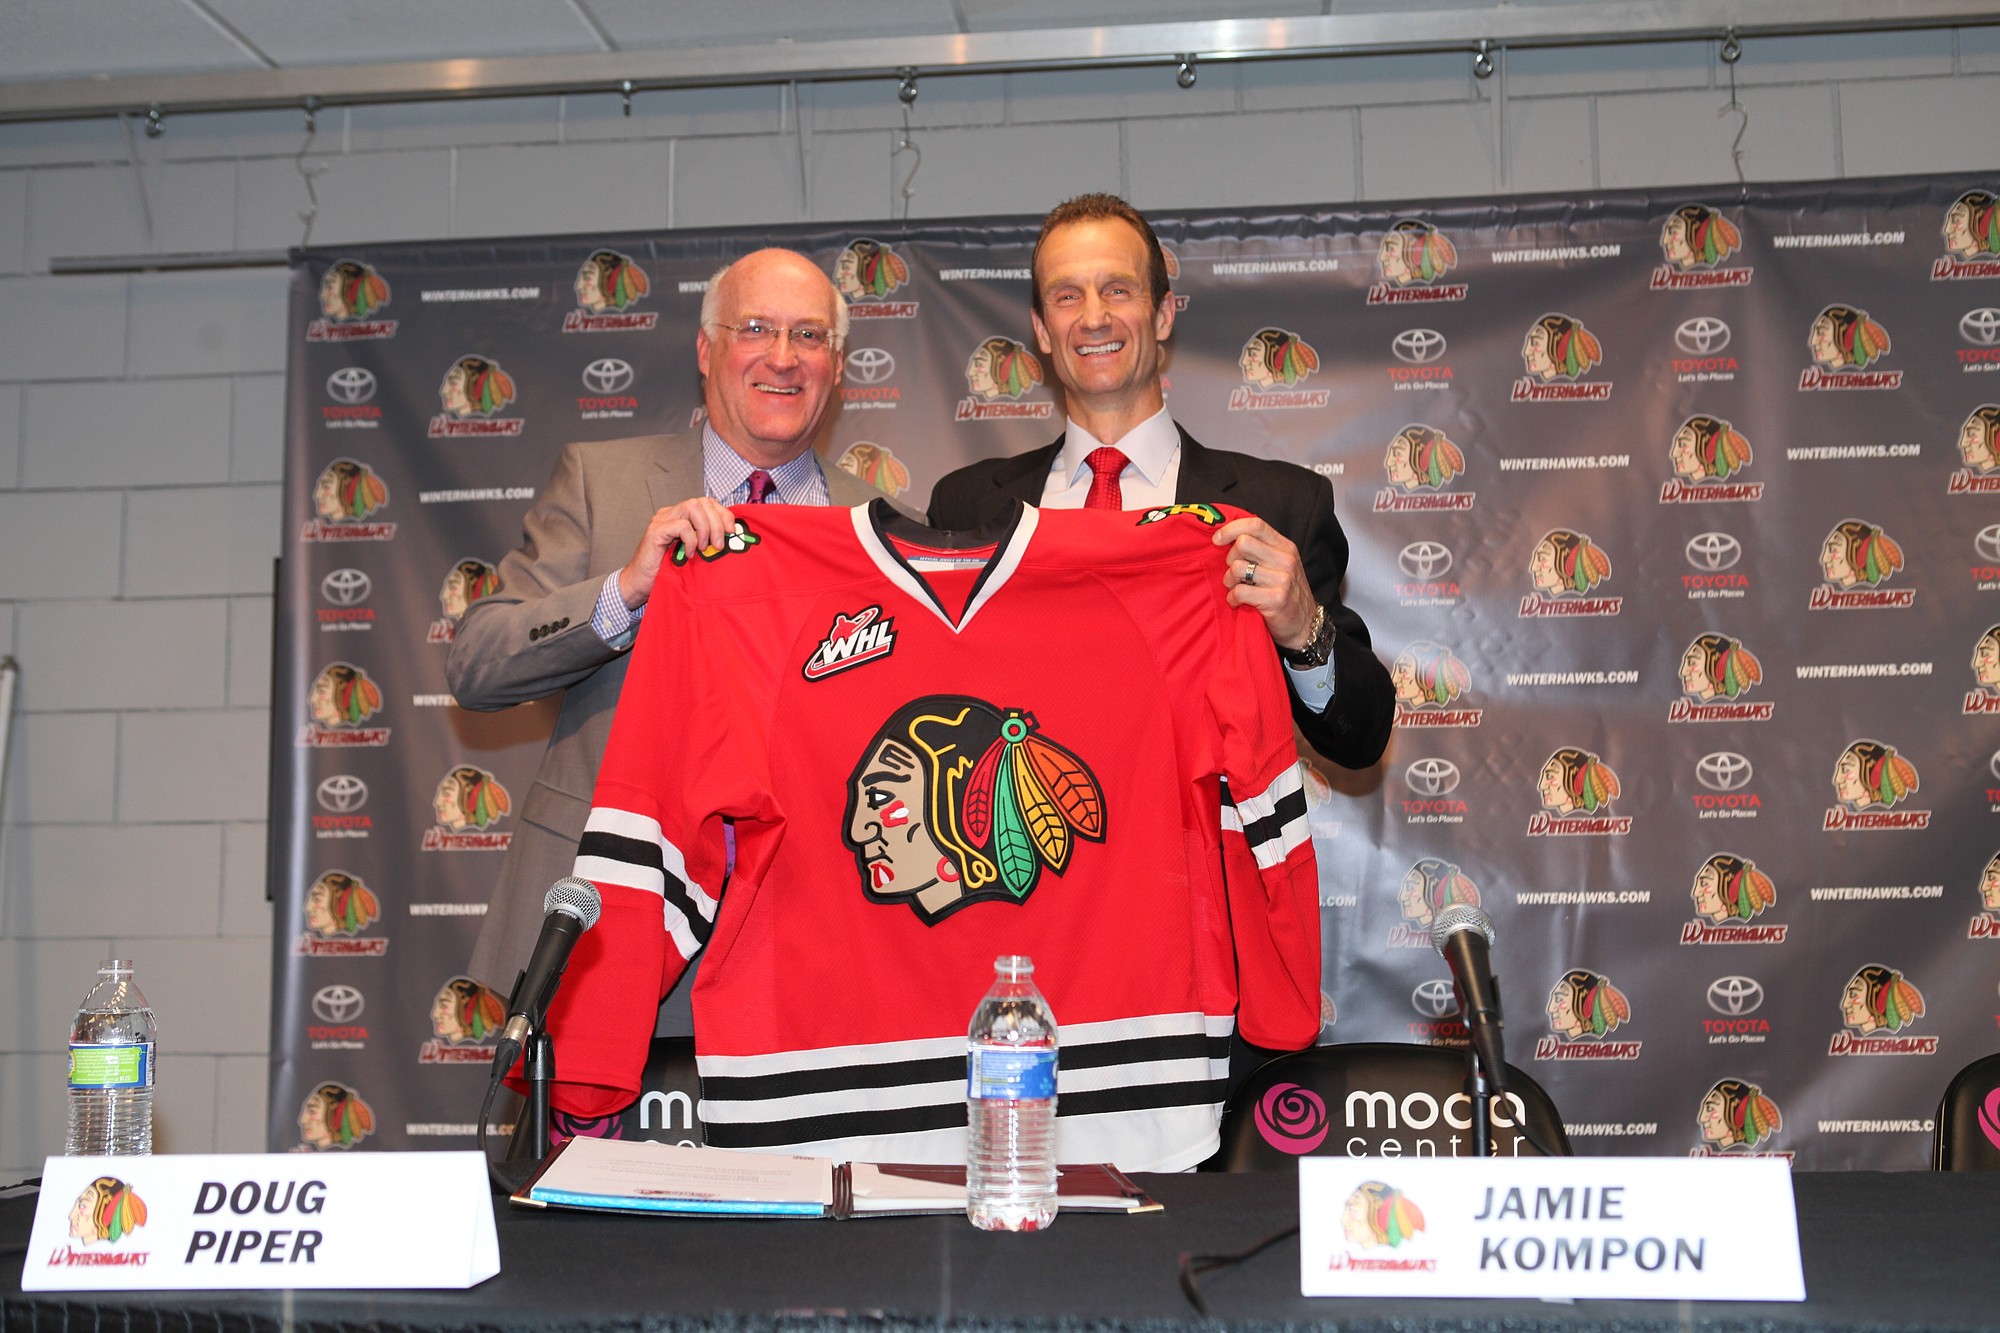 Portland Winterhawks head coach/general manager Jamie Kompon, right, with team president Doug Piper as the team introduced Kompon to his new position on Wednesday, July 9.